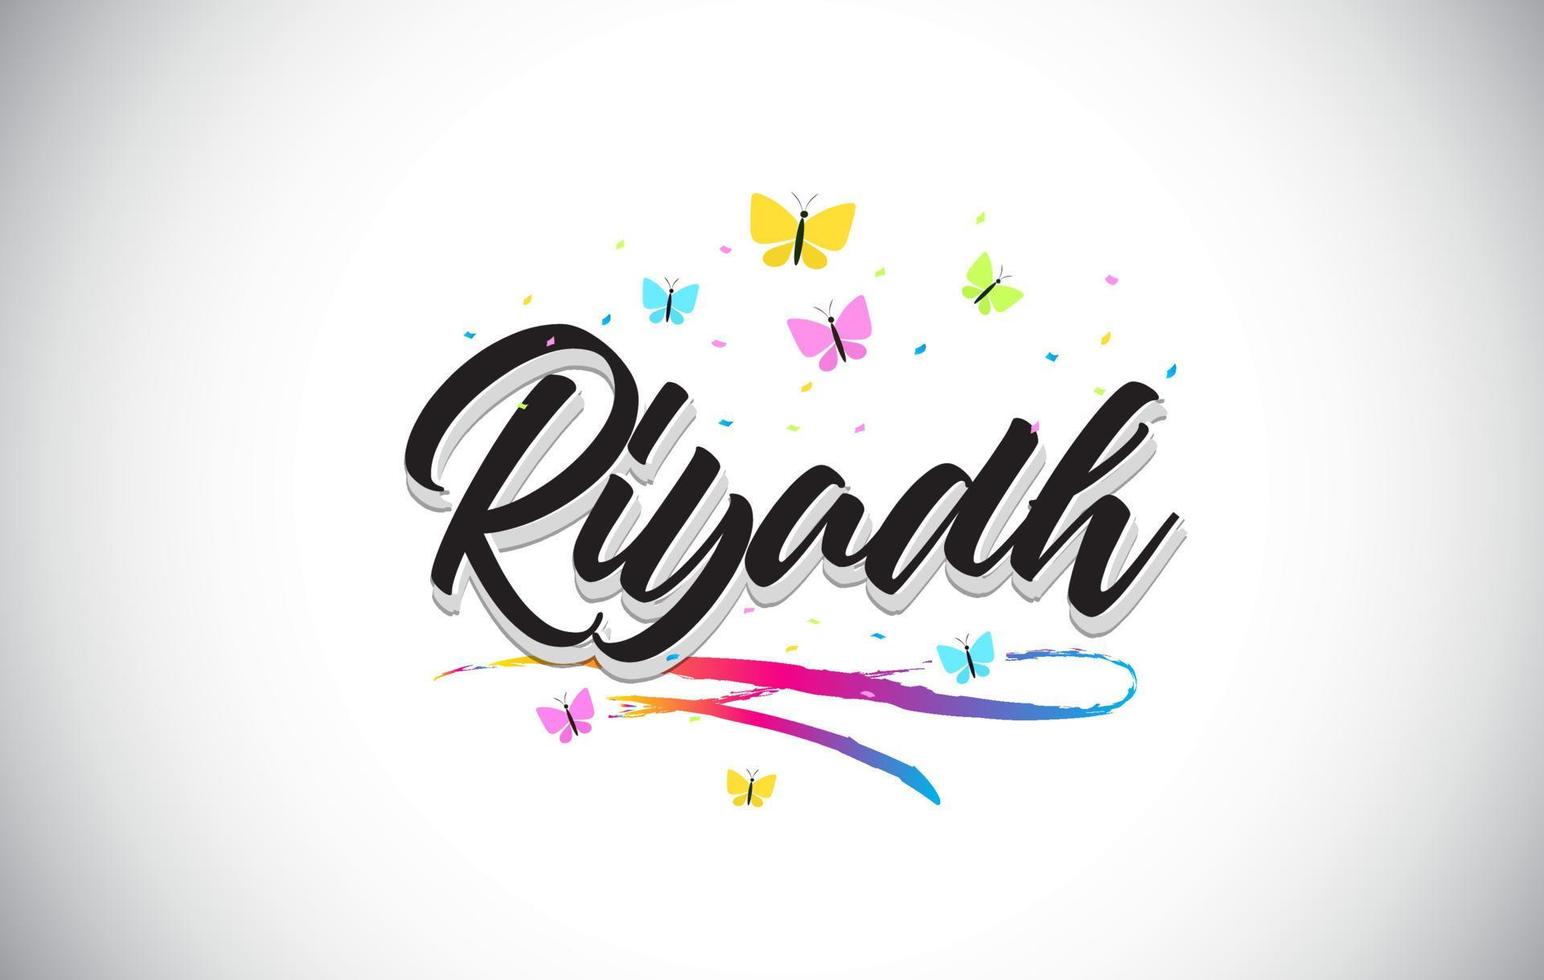 Riyadh Handwritten Vector Word Text with Butterflies and Colorful Swoosh.